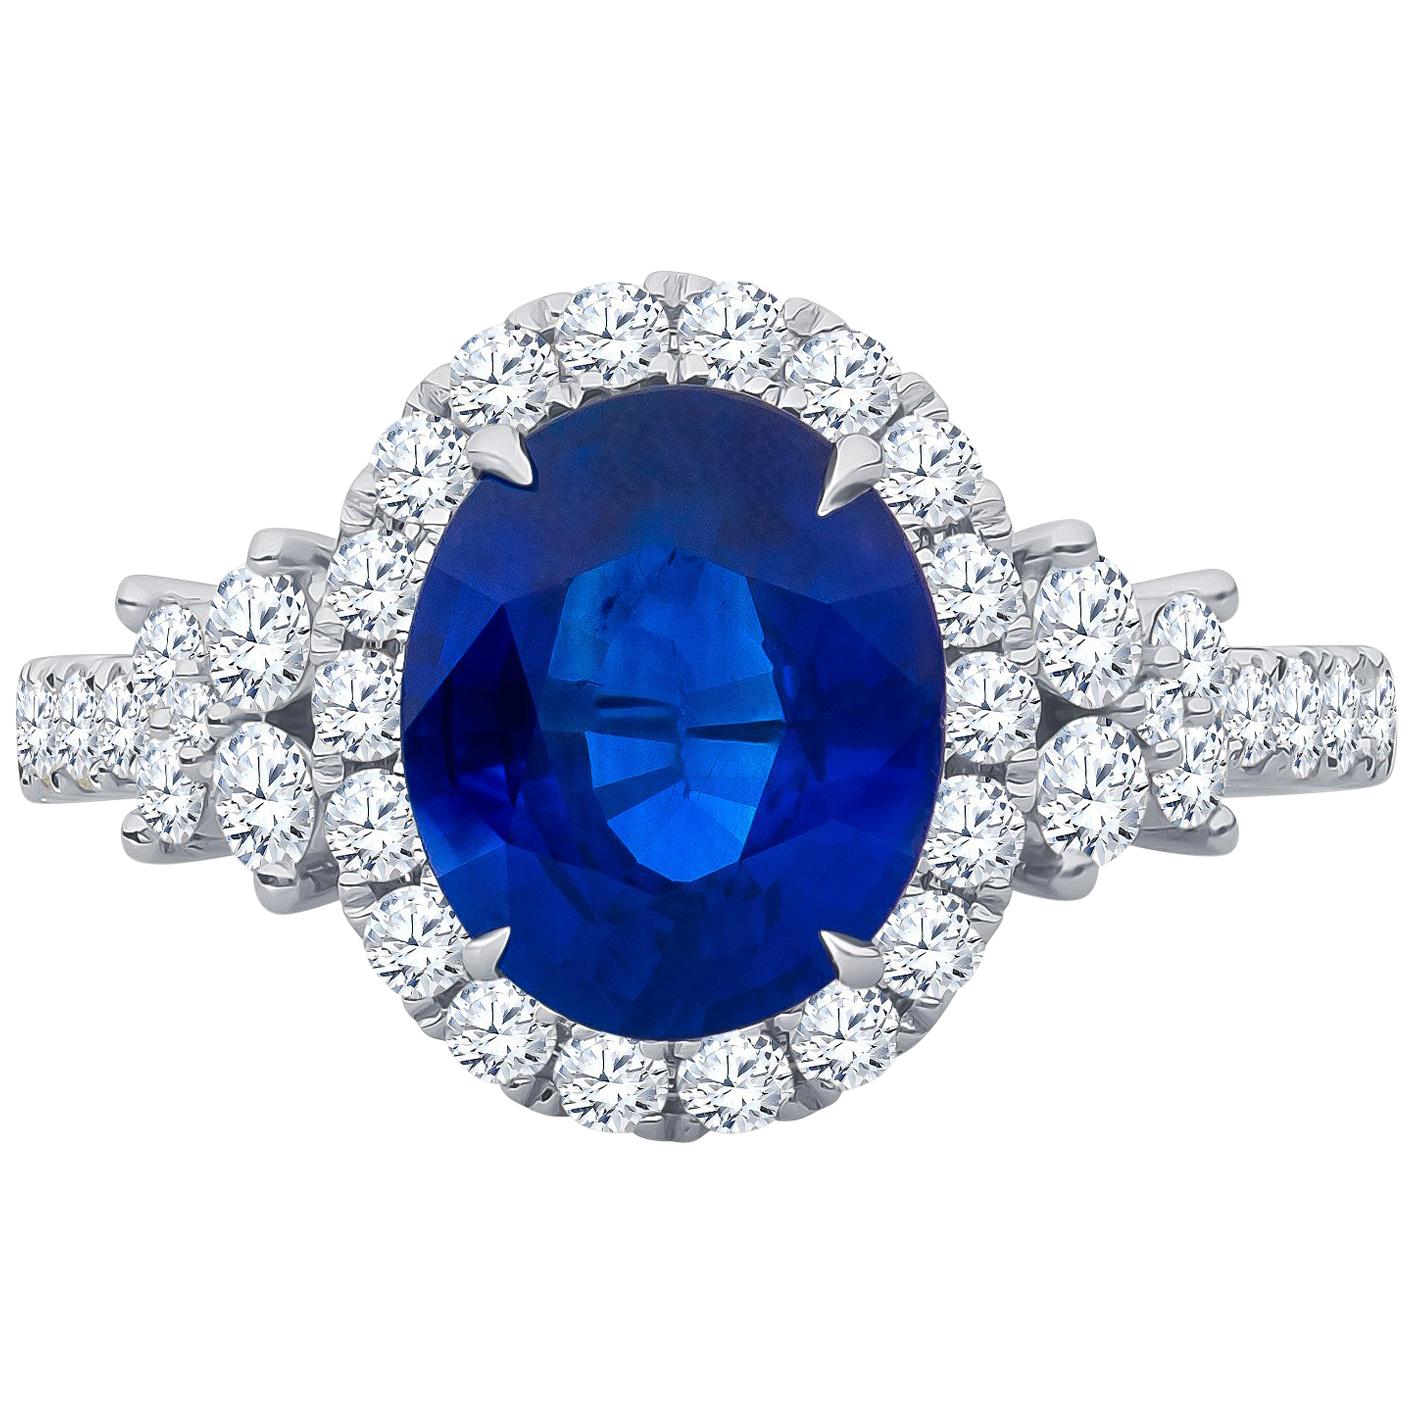 2.70 Carat (AGL)Natural Blue Sapphire, 0.84 total weight Diamonds in 18kw Ring